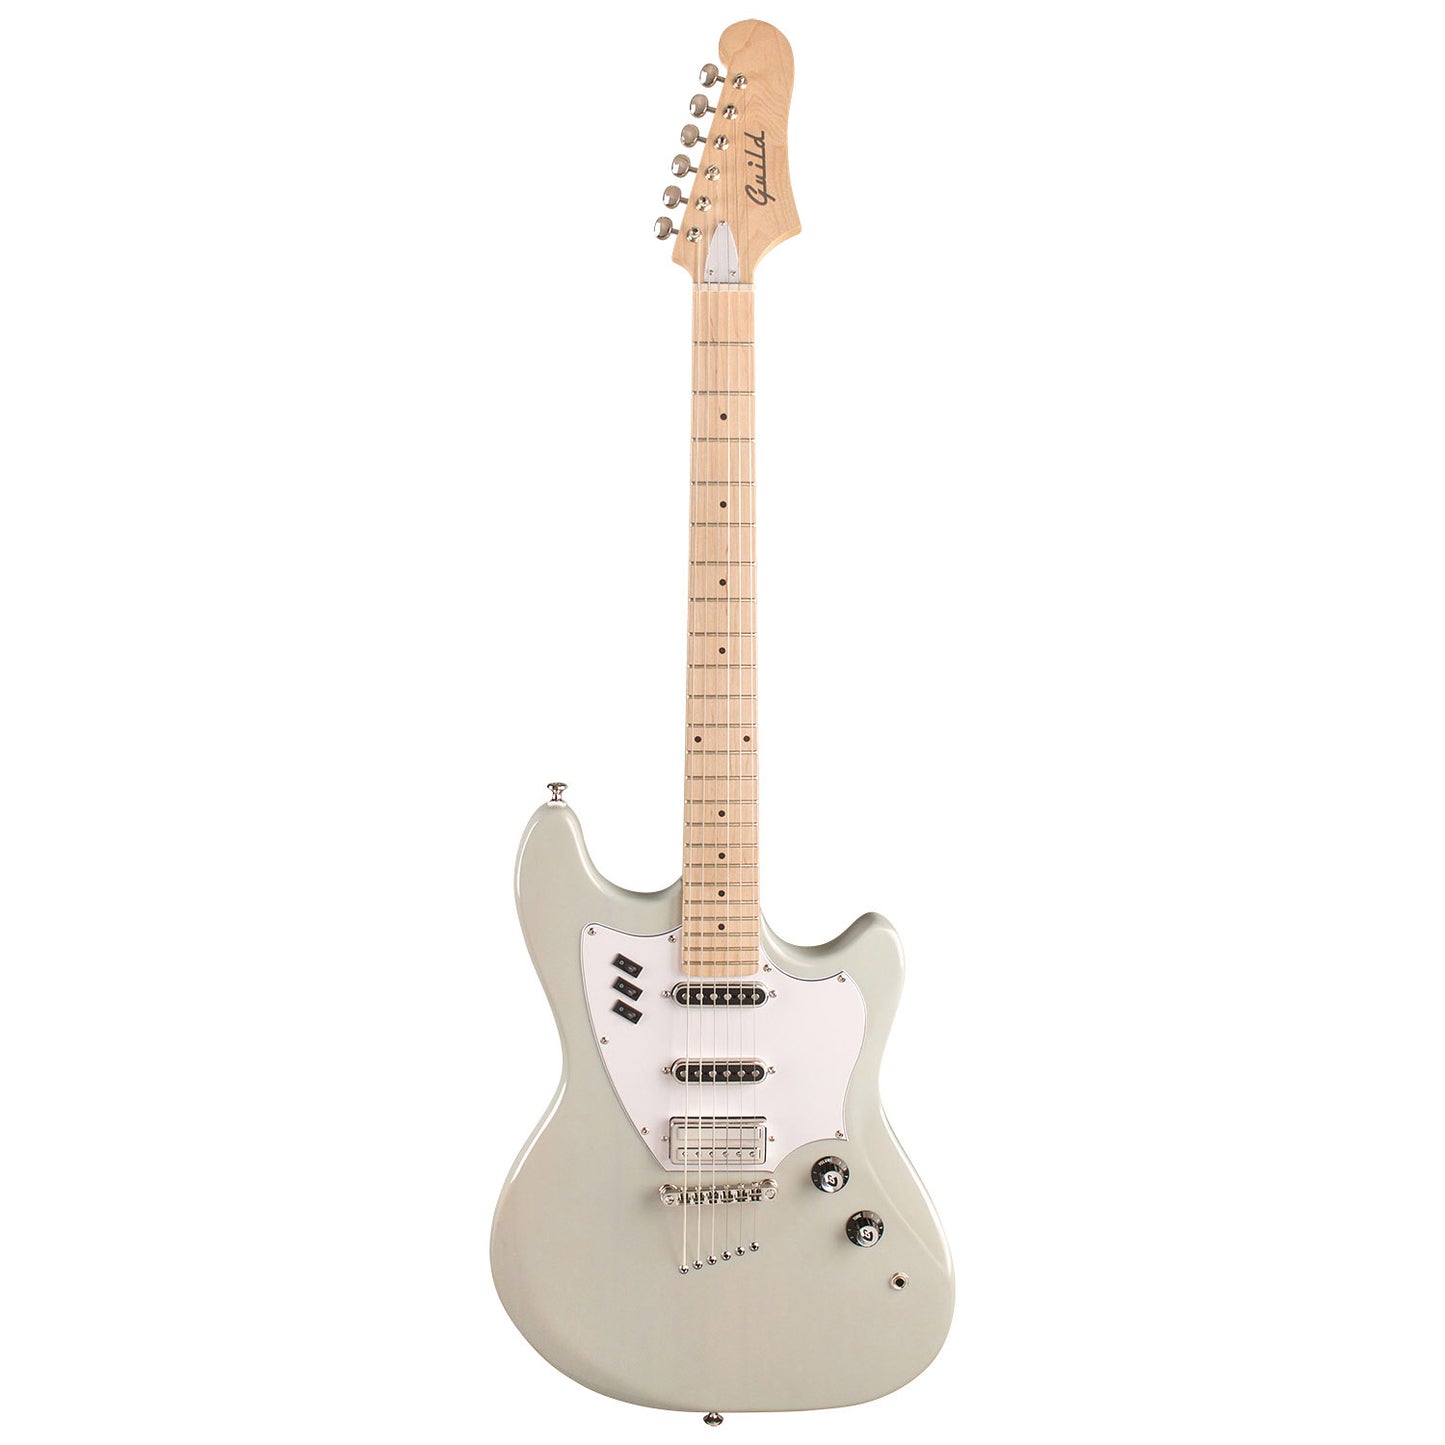 Guild Surfliner Electric Guitar in Catalina White Sage